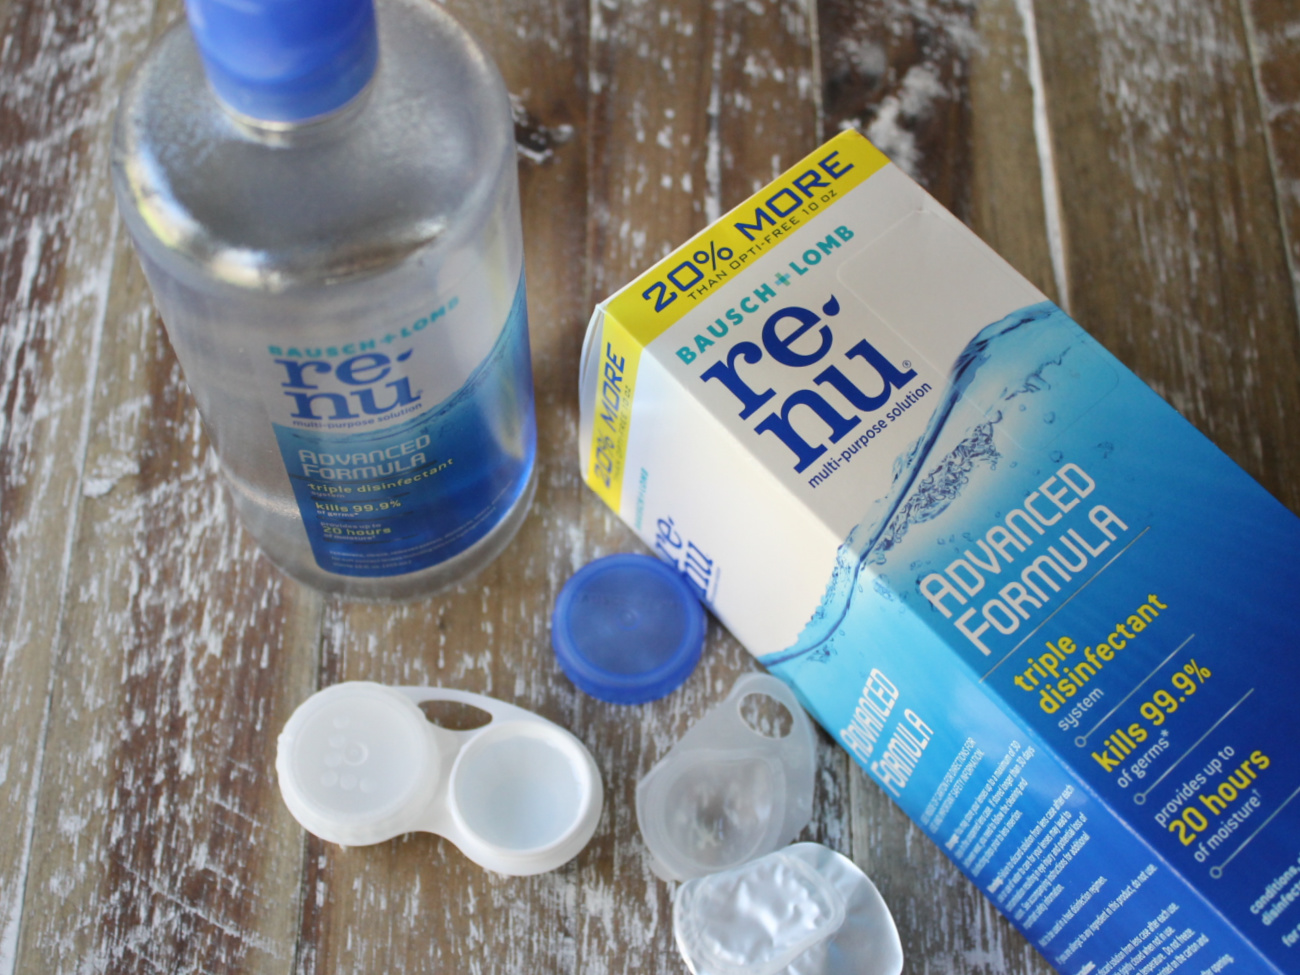 Renu Coupon Makes Contact Solution As Low As $4 Per Bottle At Kroger